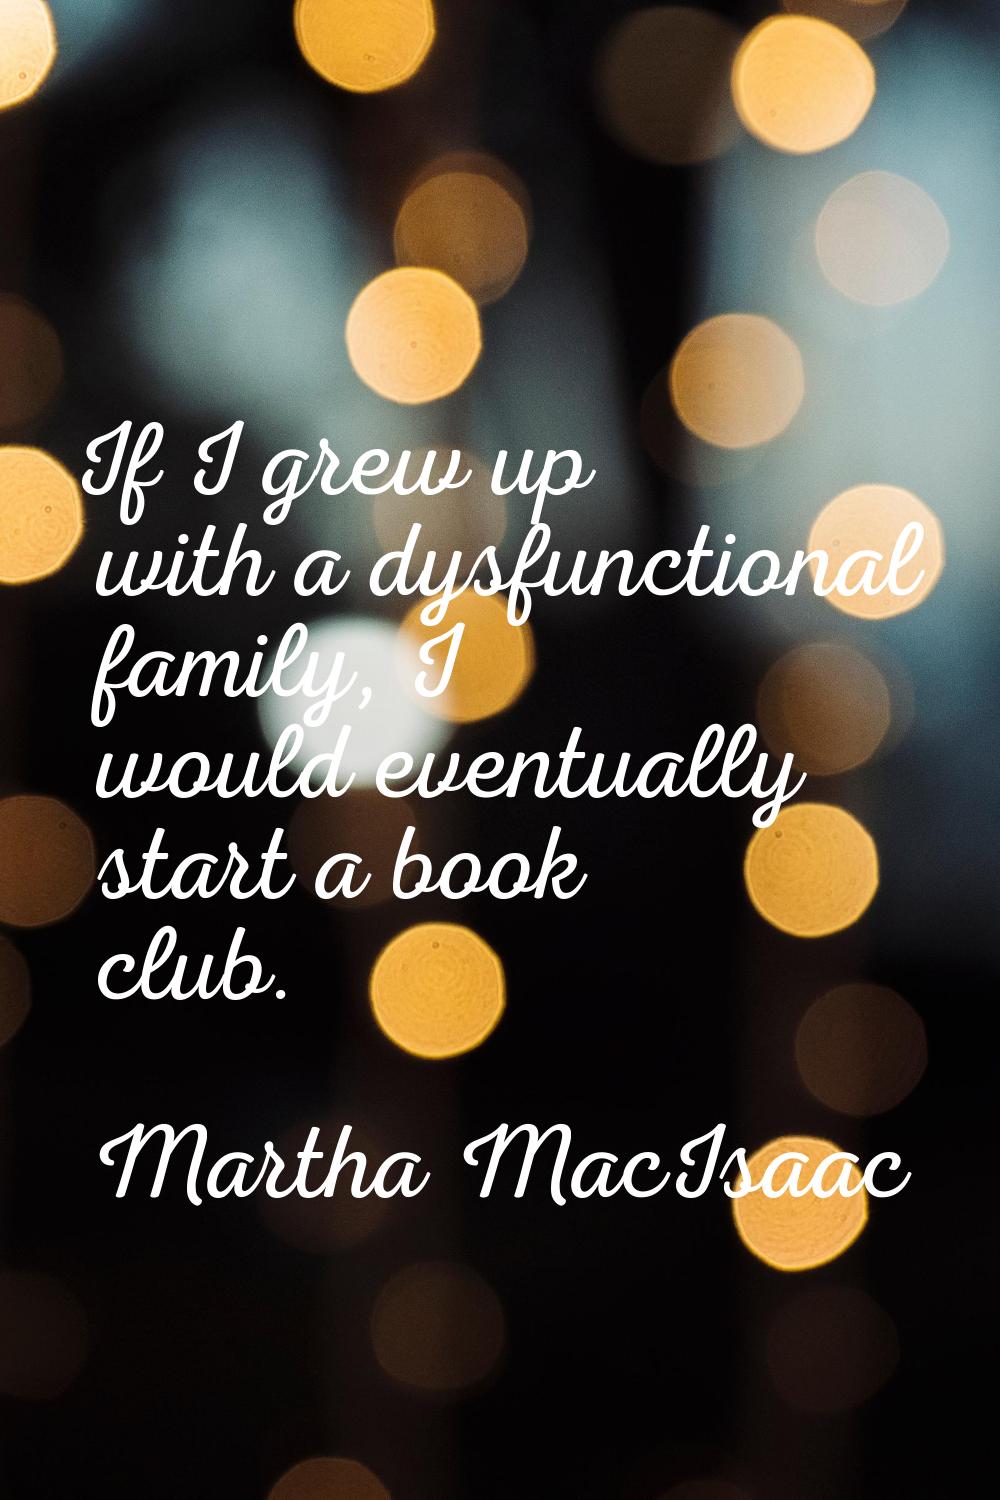 If I grew up with a dysfunctional family, I would eventually start a book club.